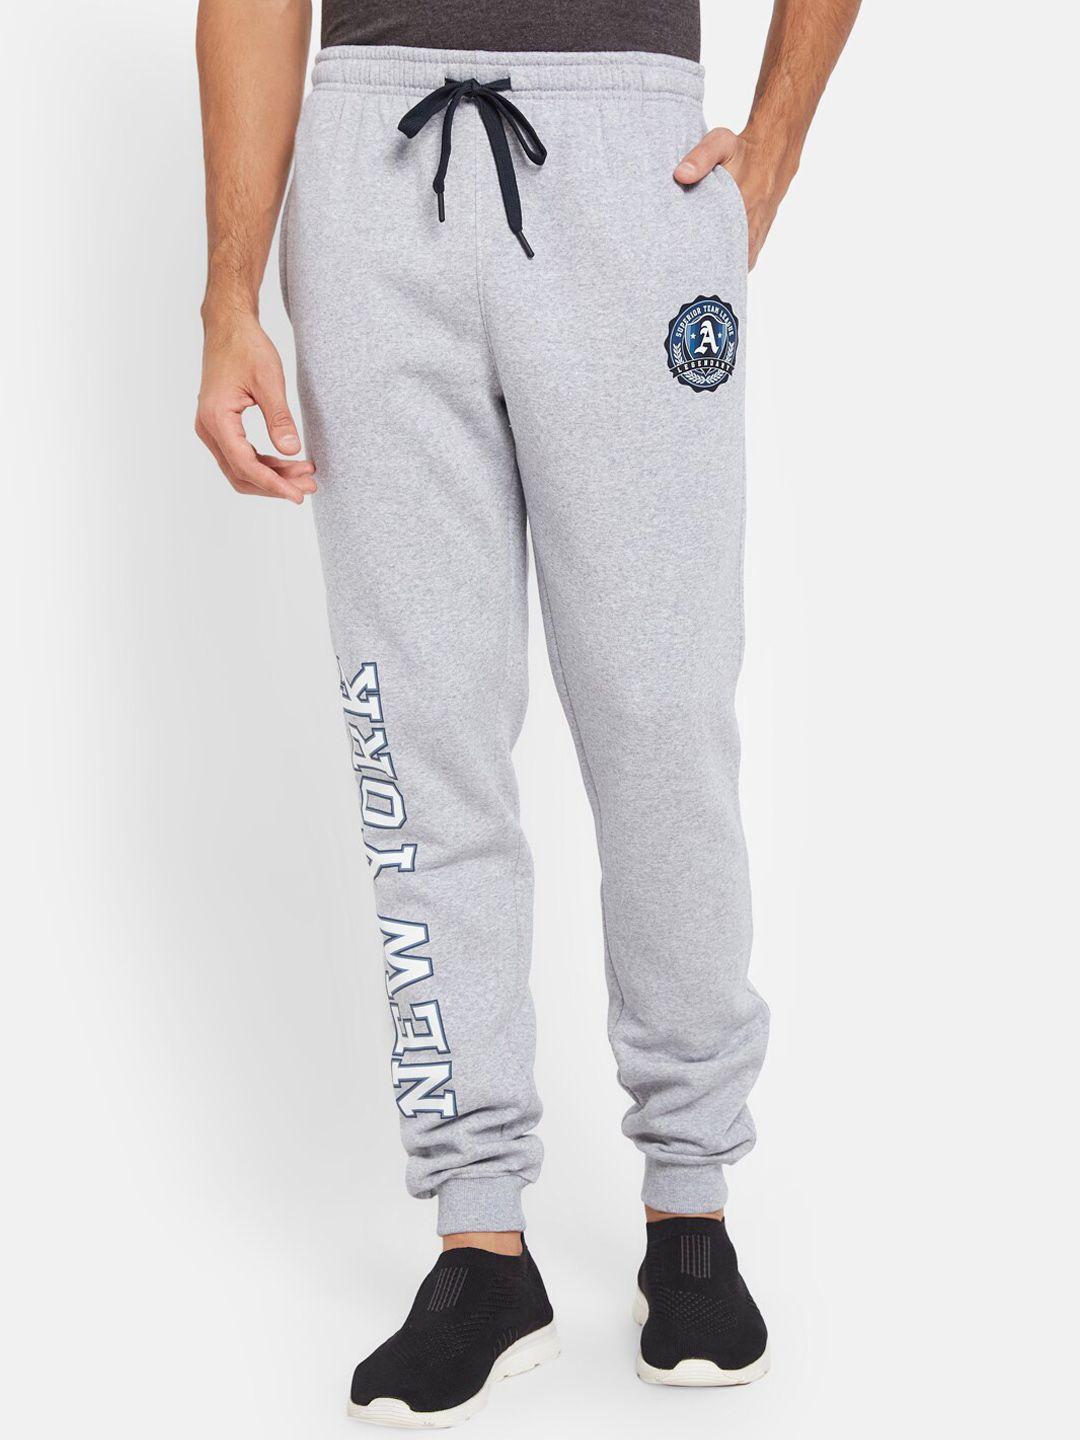 octave printed cotton mid-rise joggers